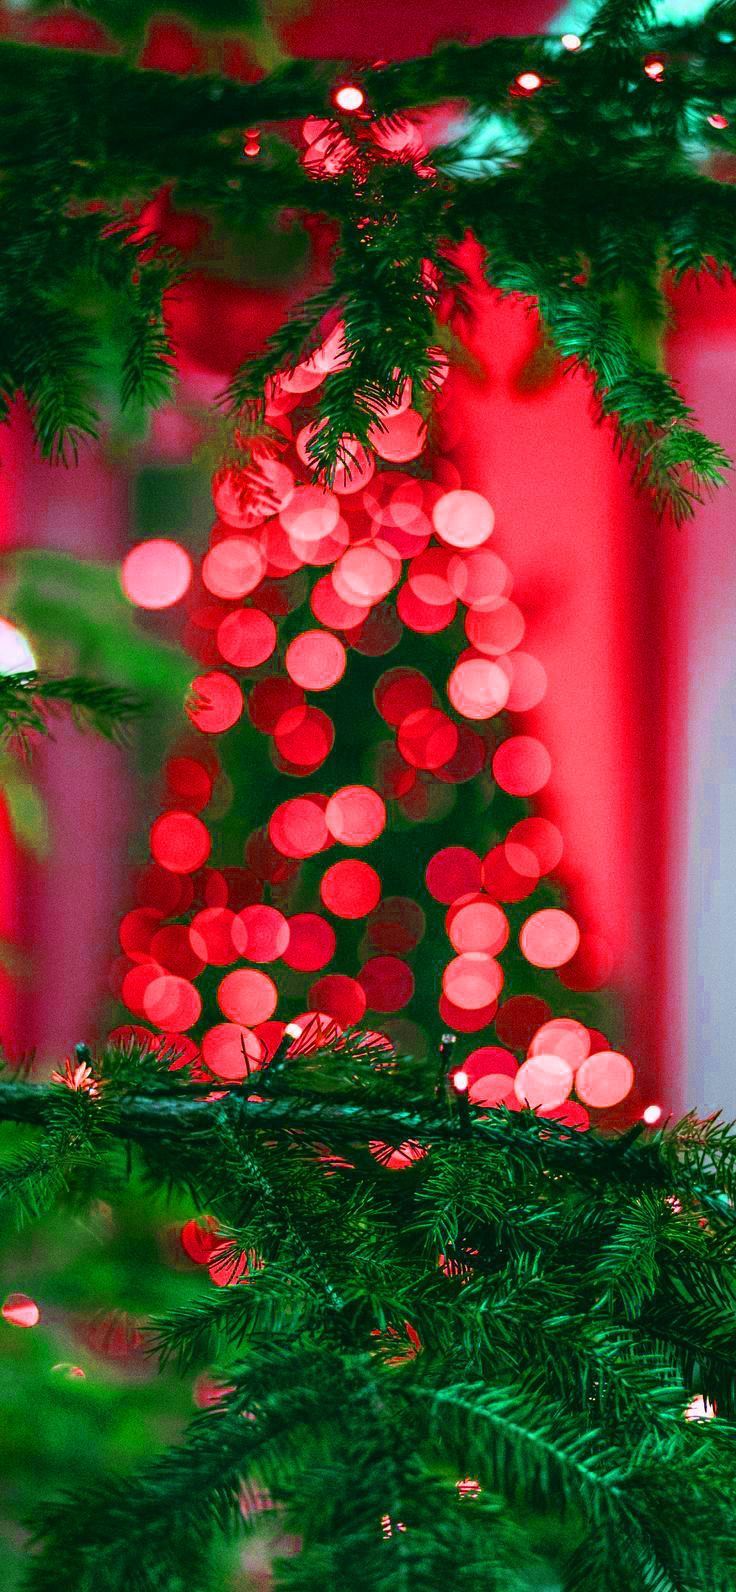 Christmas tree lights on a red background - Cute Christmas, Christmas iPhone